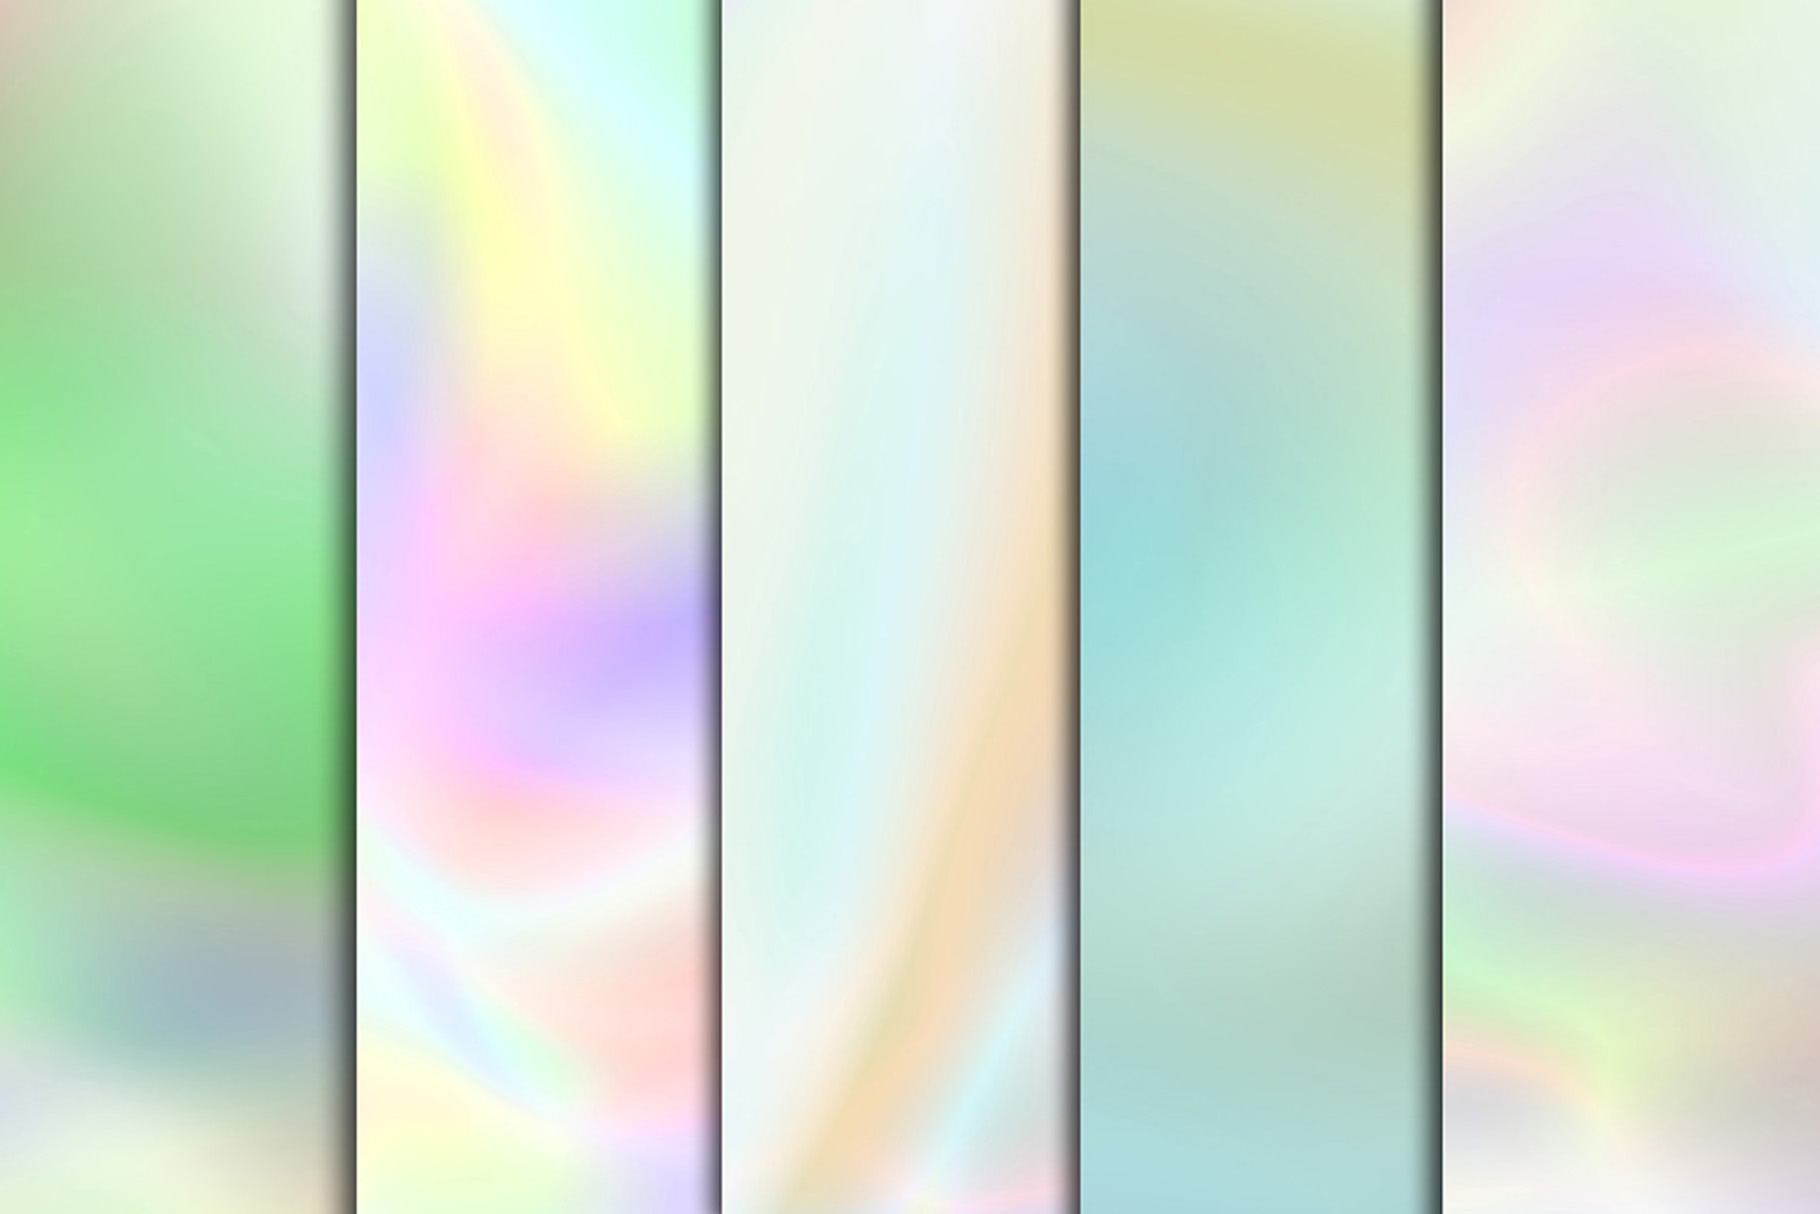 Holographic Backgrounds cover image.